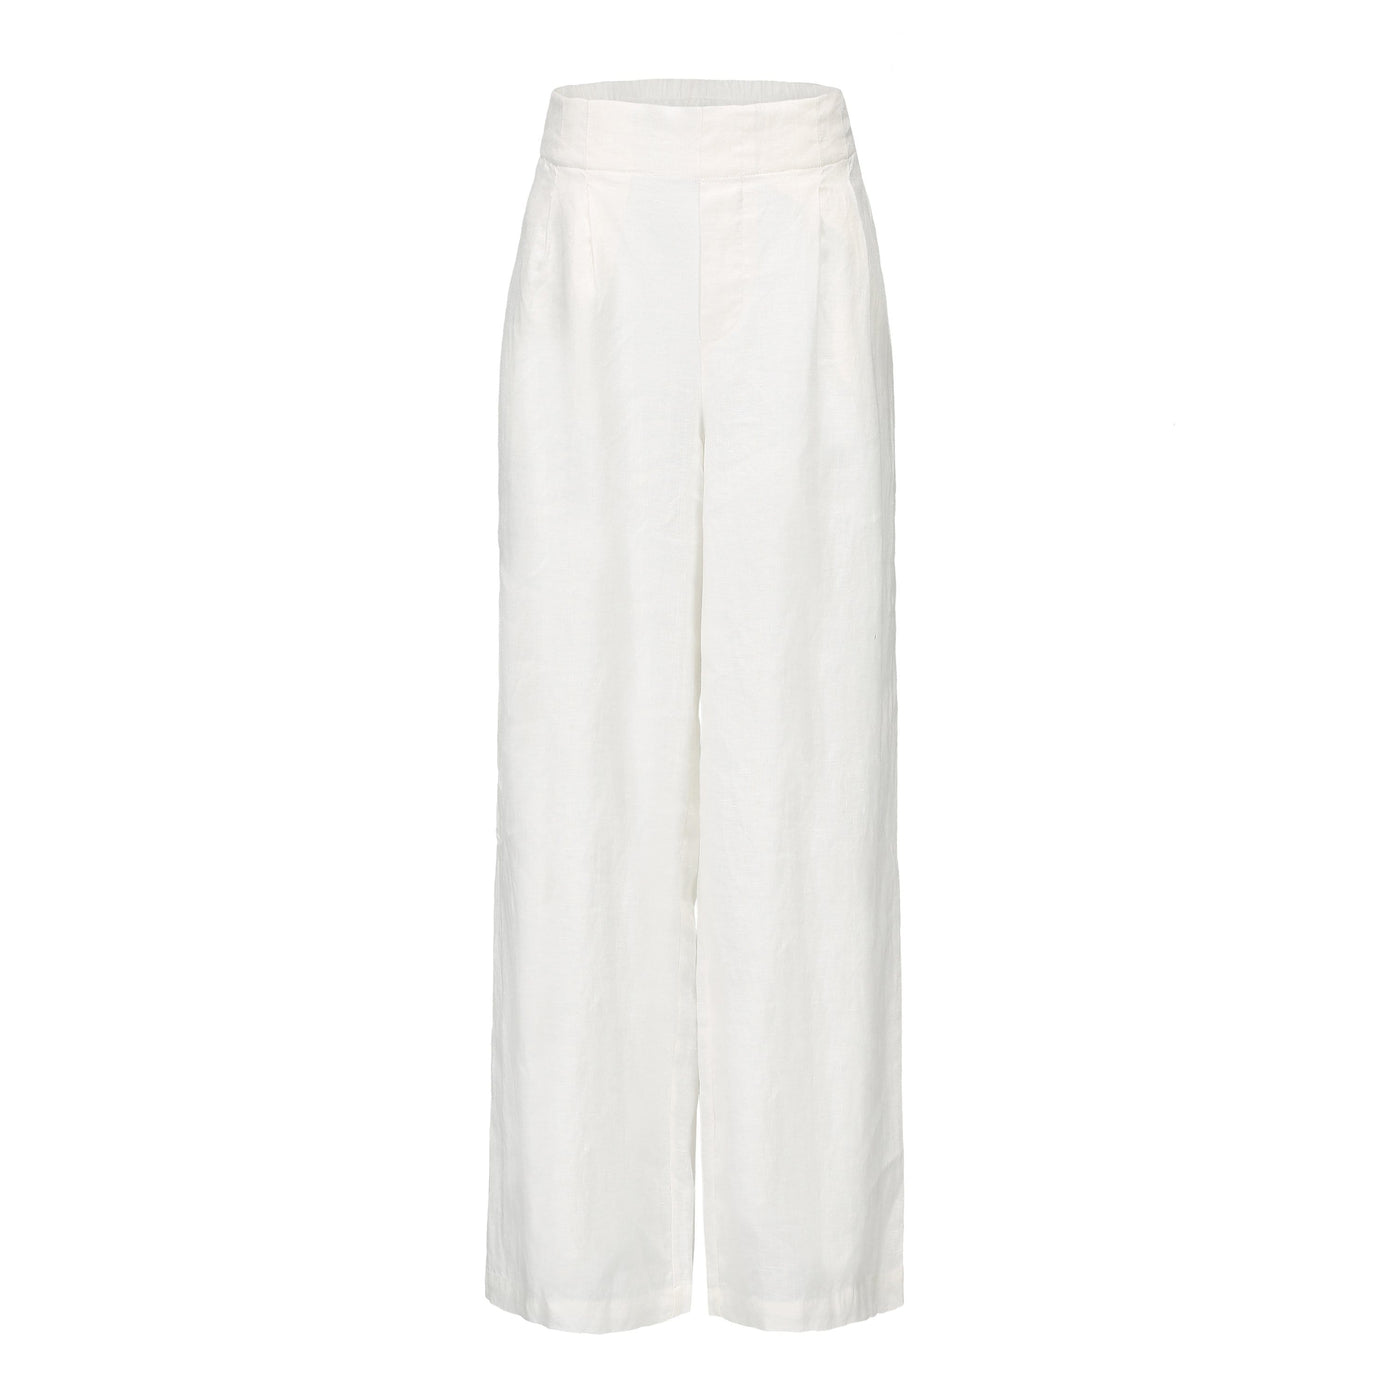 Lilly Pilly Collection 100% organic linen Olivia Pants in Ivory as 3D image showing front view